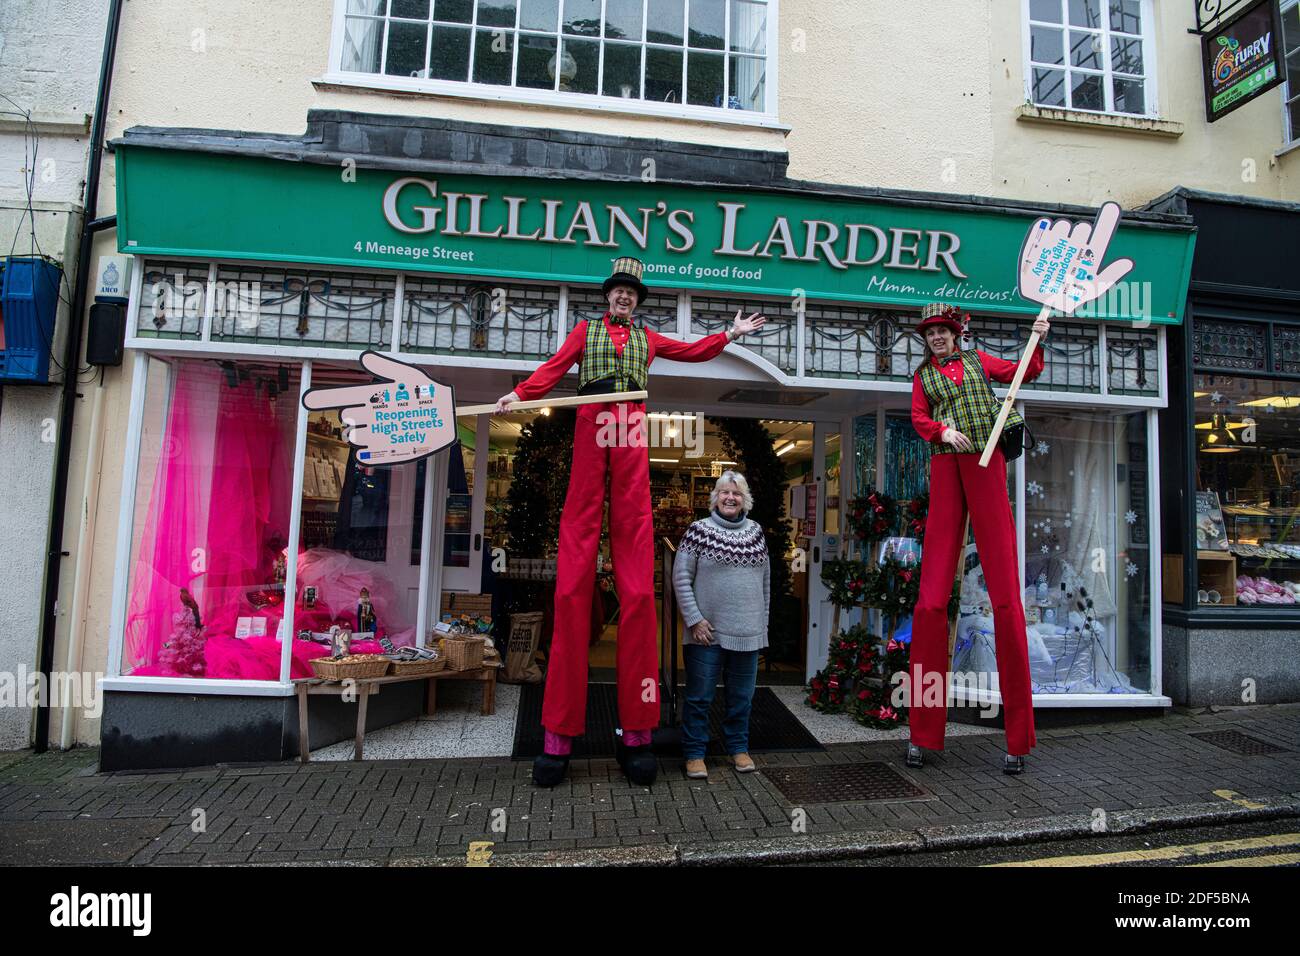 Helston town centre, Cornwall, UK Higher Beings Circus Abby and Star, Cornwall Council is employing Street Ambassadors to advise traders and shoppers on how to shop safely in Helston town centre. Credit: kathleen white/Alamy Live News Stock Photo